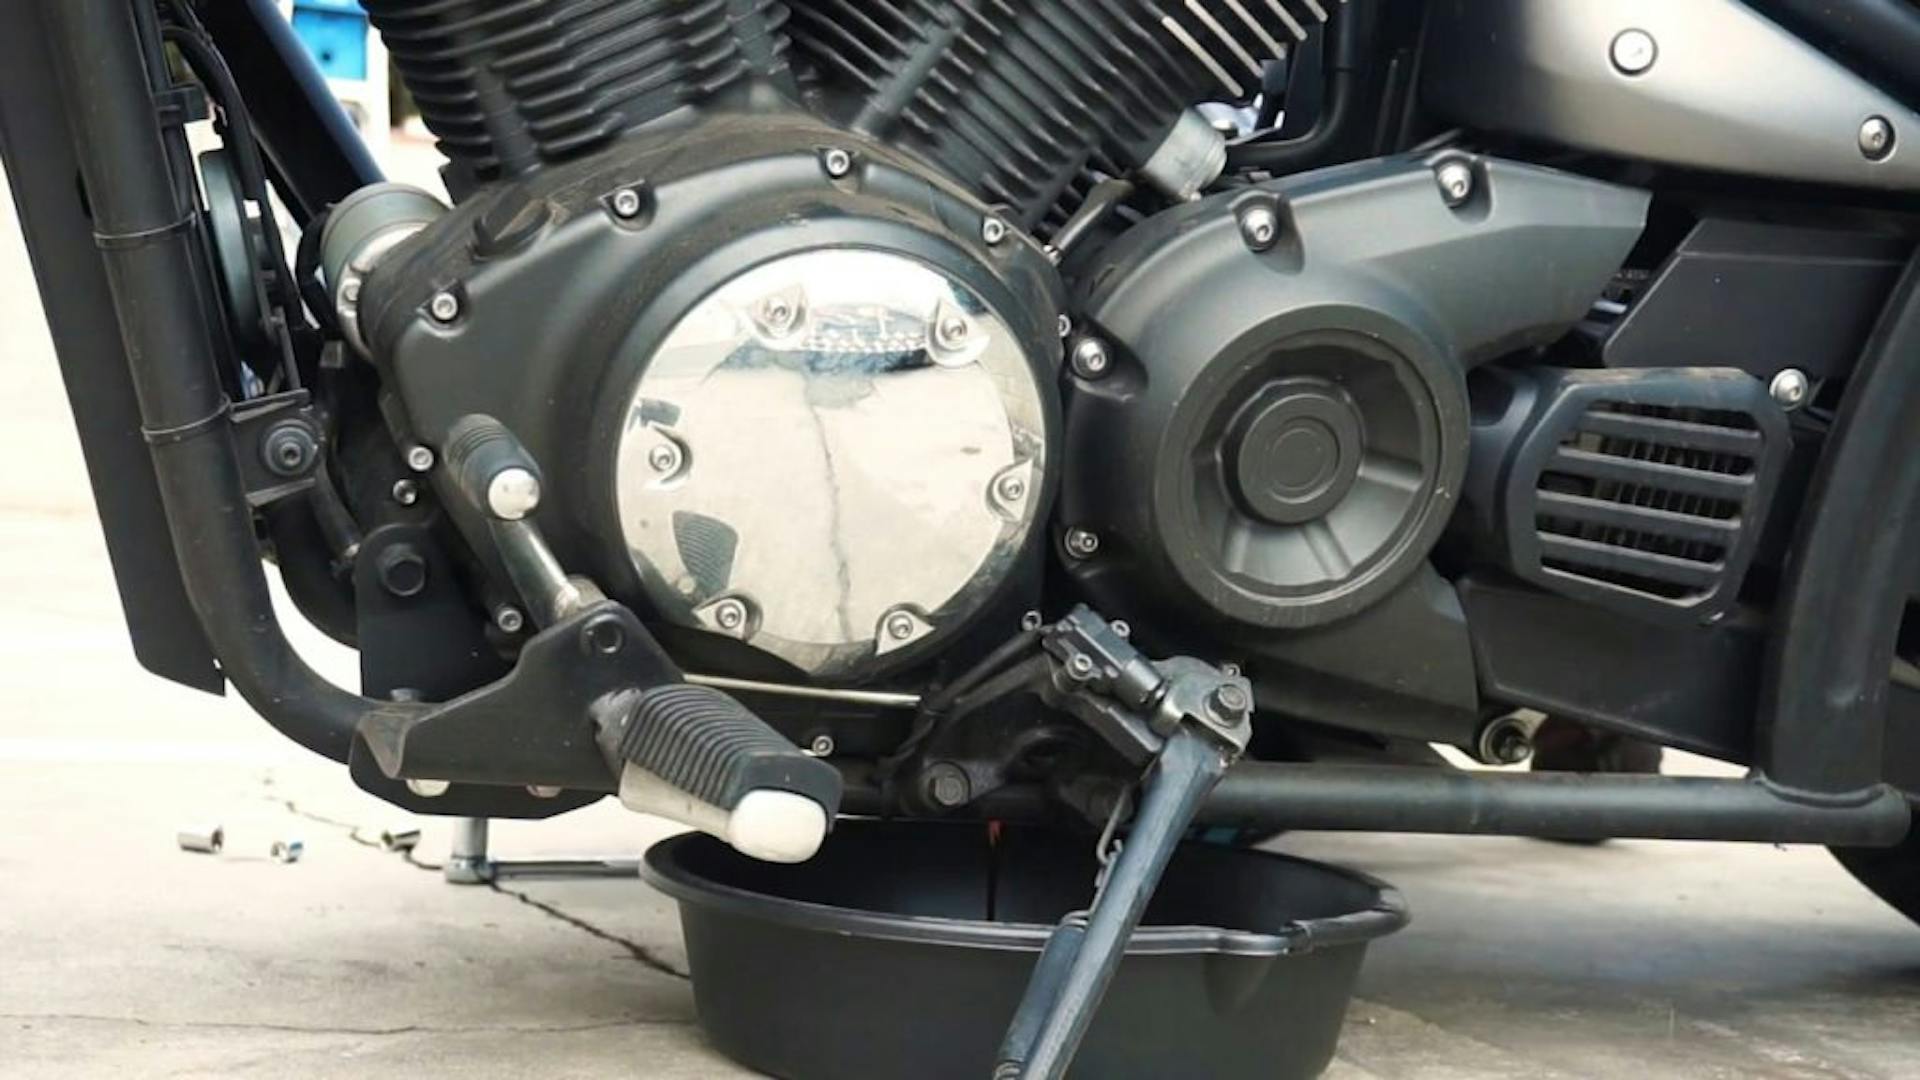 Oil pan under a motorcycle